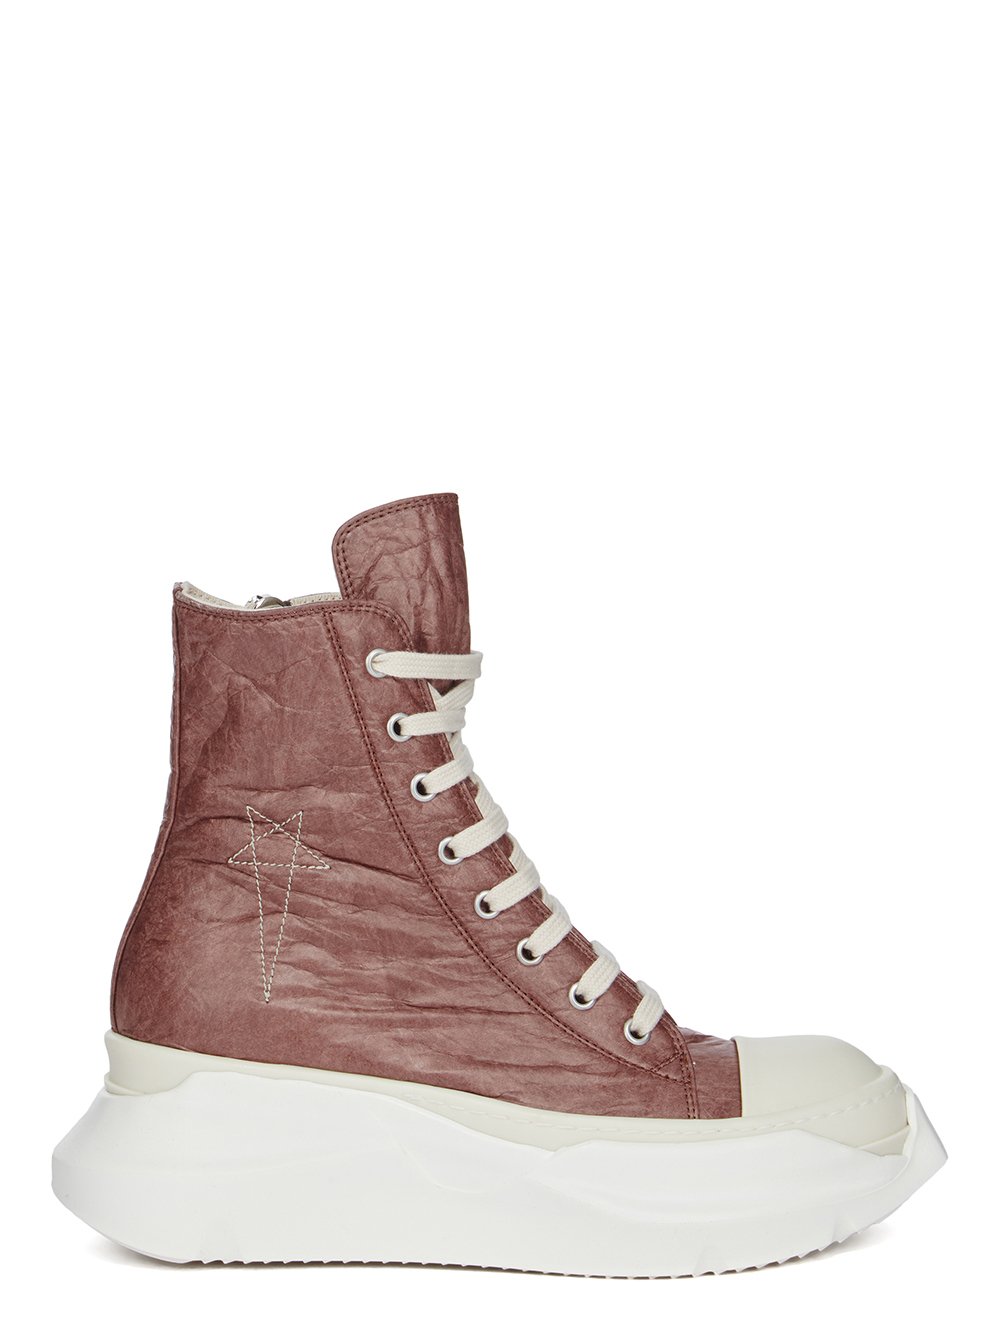 DRKSHDW FW23 LUXOR ABSTRACT SNEAK IN MAUVE, PEARL AND MILK PAPER POLY